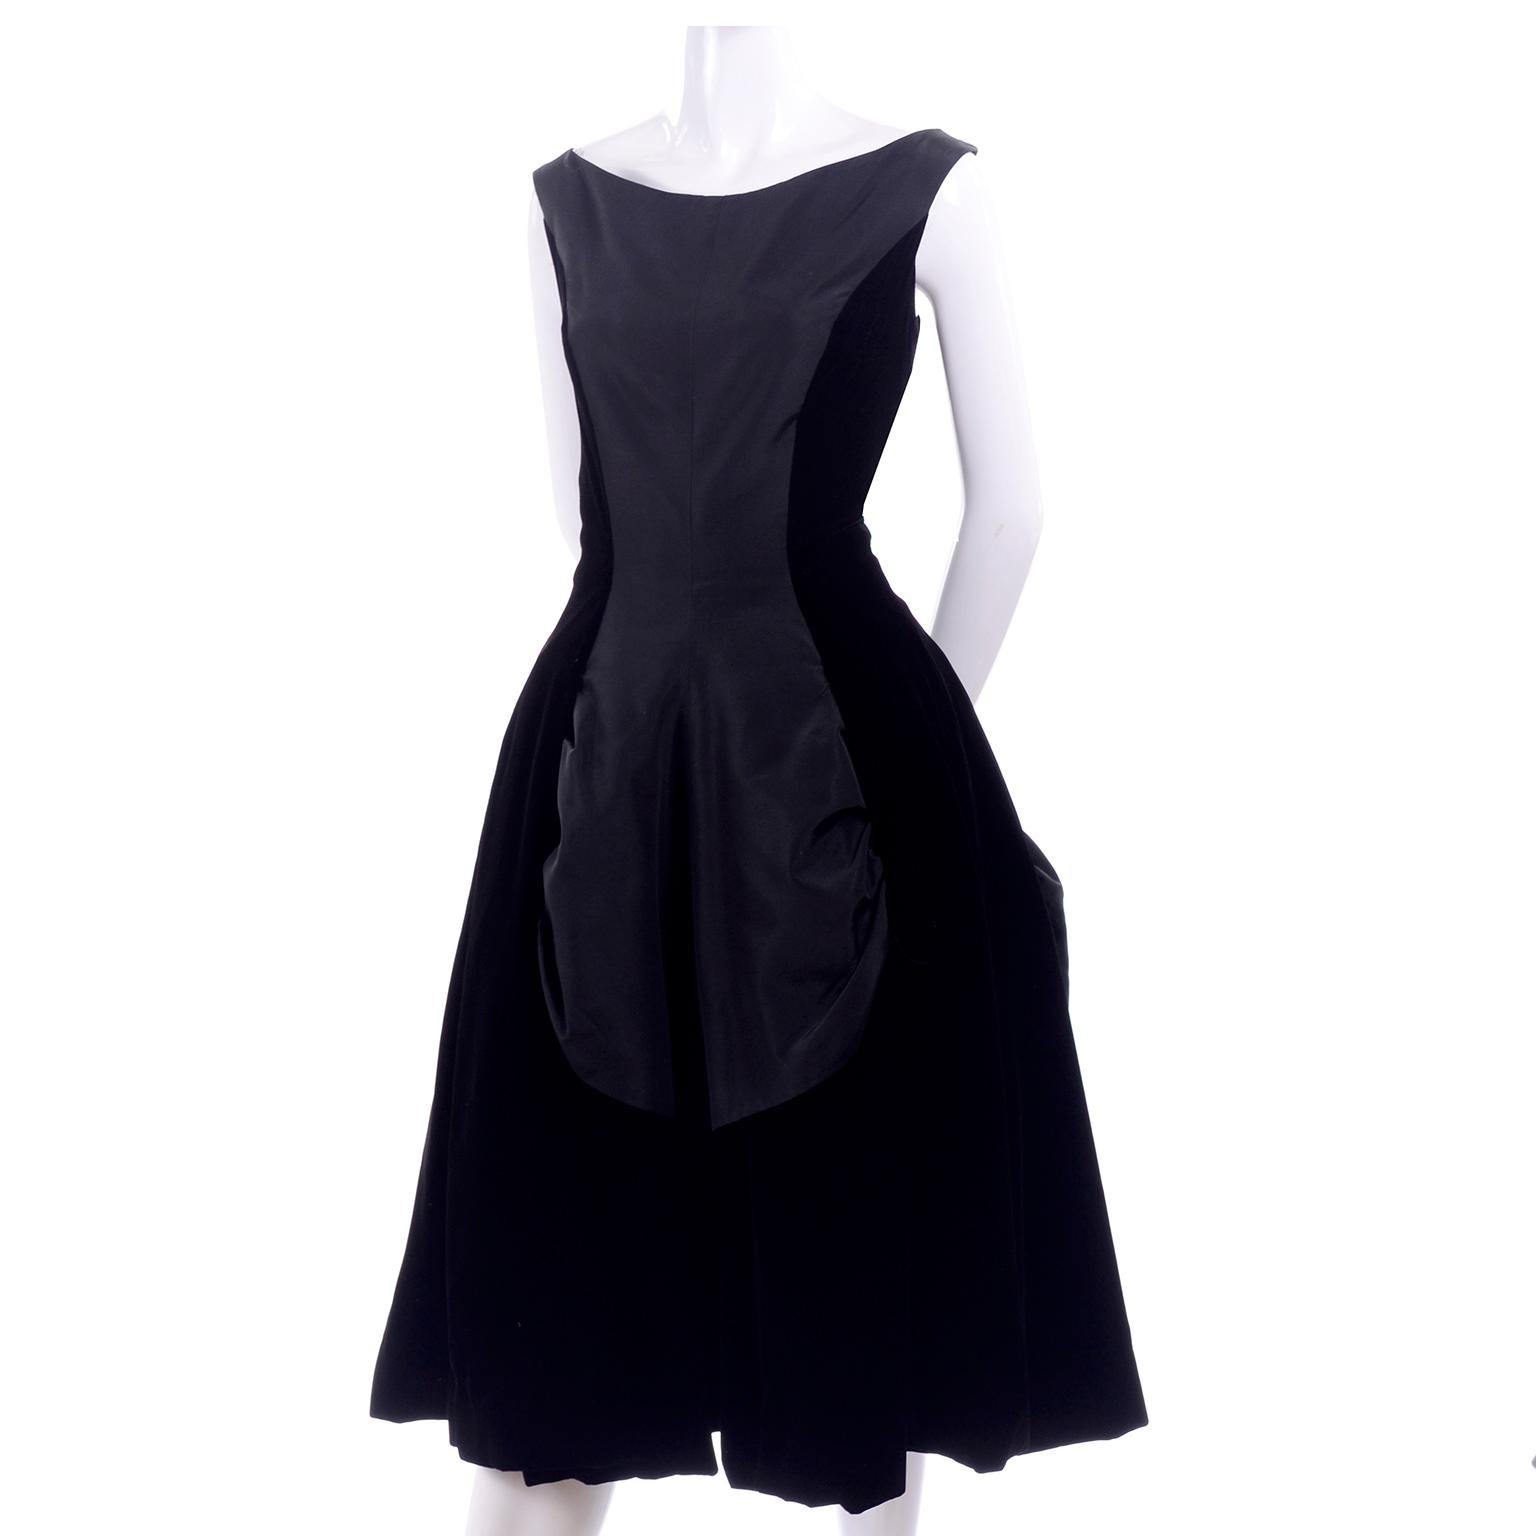 This is a wonderful vintage 1950's dress that is so beautifully made! The dress is black velvet with panels of gathered taffeta and pellon lining. There is a built in full taffeta under skirt and the dress closes with a back metal zipper.  Fits